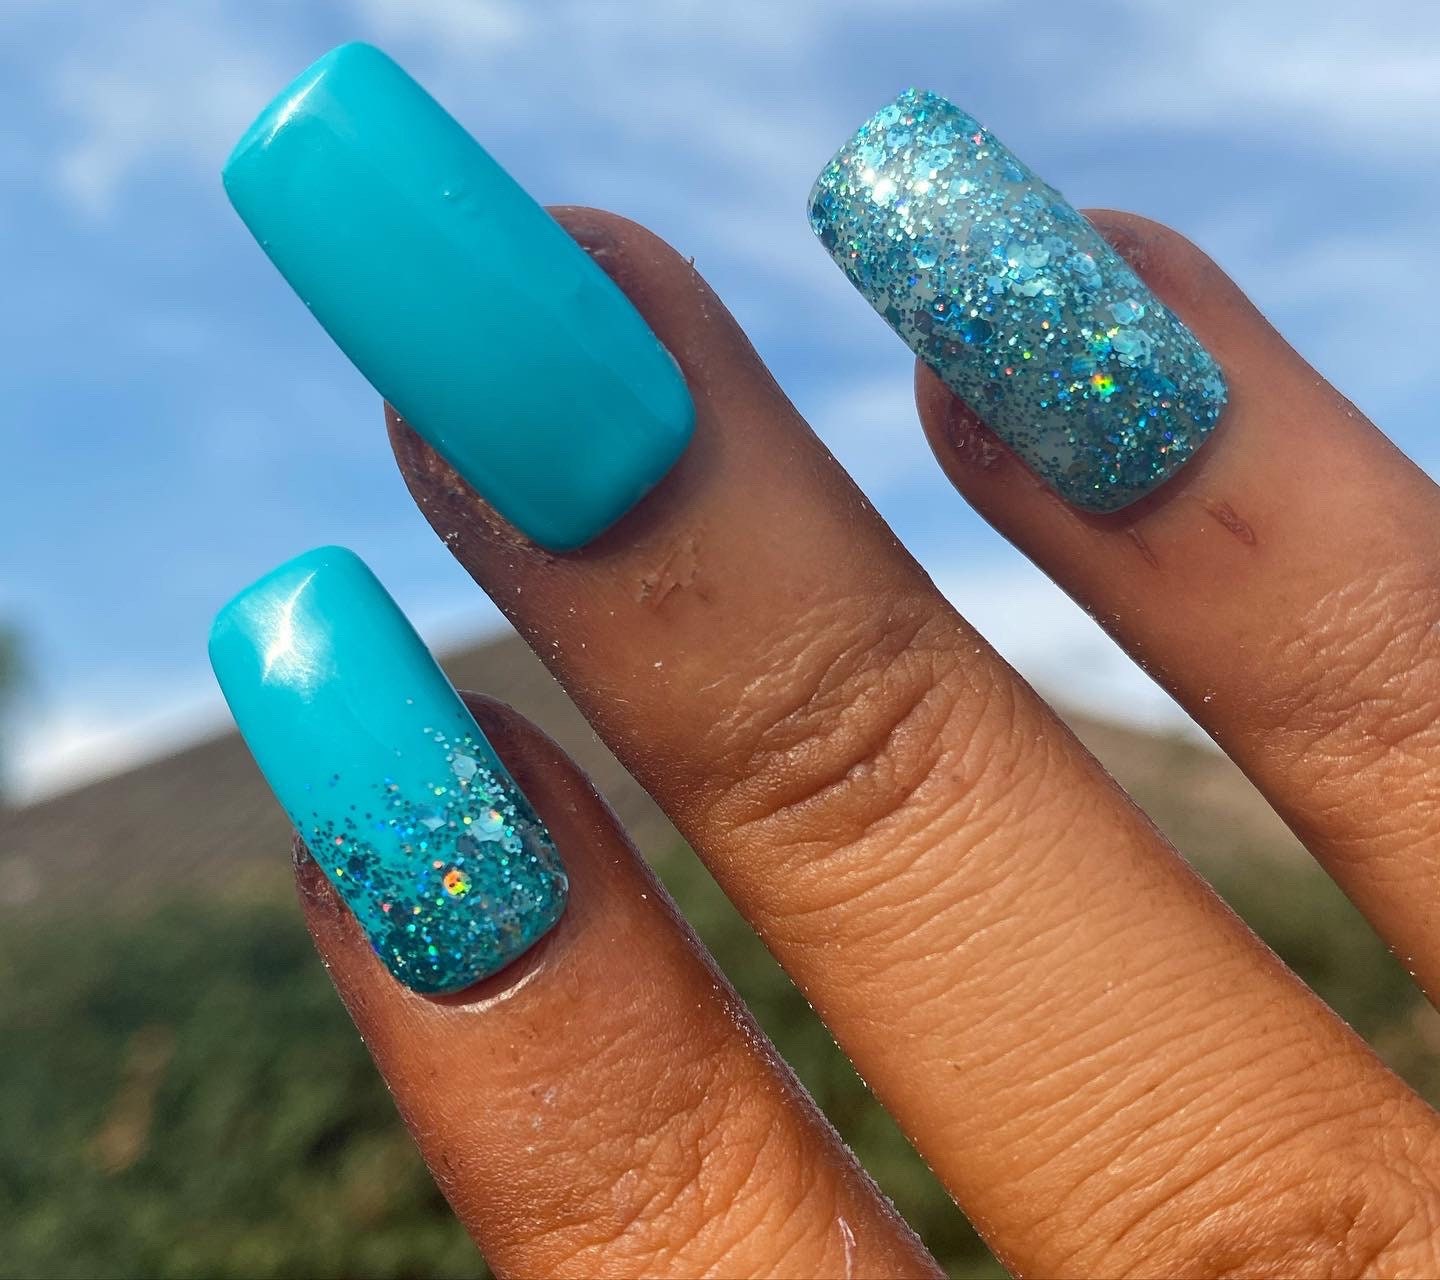 Tag someone who would love these aqua blue nails #nails #blue #aquablue  #aquablu... | Teal nails, Turquoise nails, Gel nails